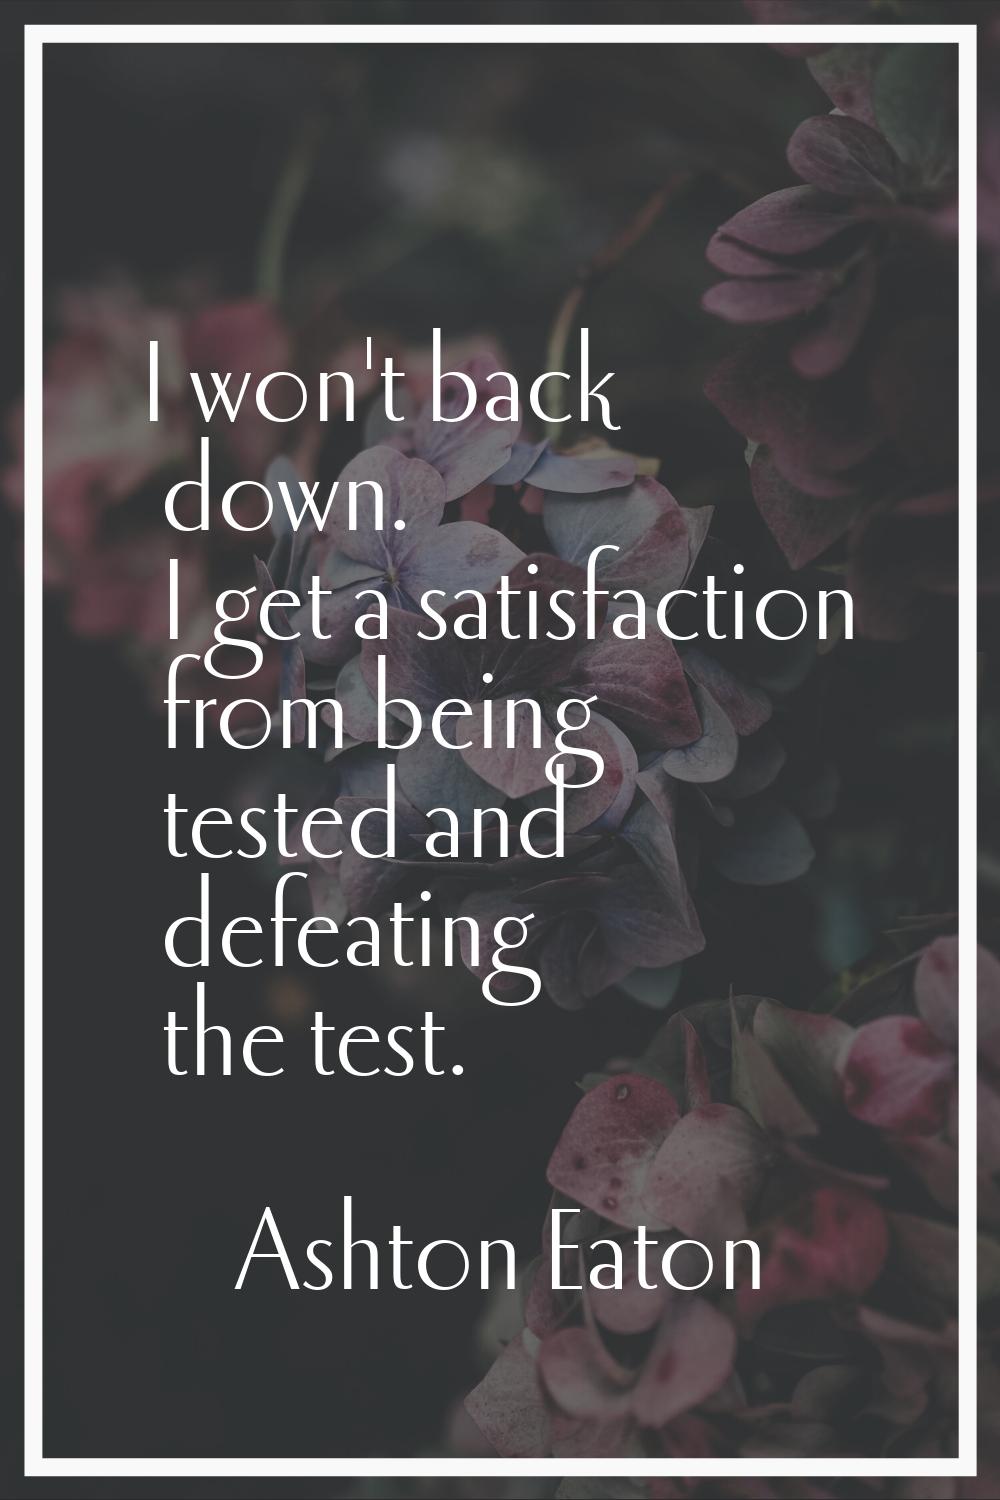 I won't back down. I get a satisfaction from being tested and defeating the test.